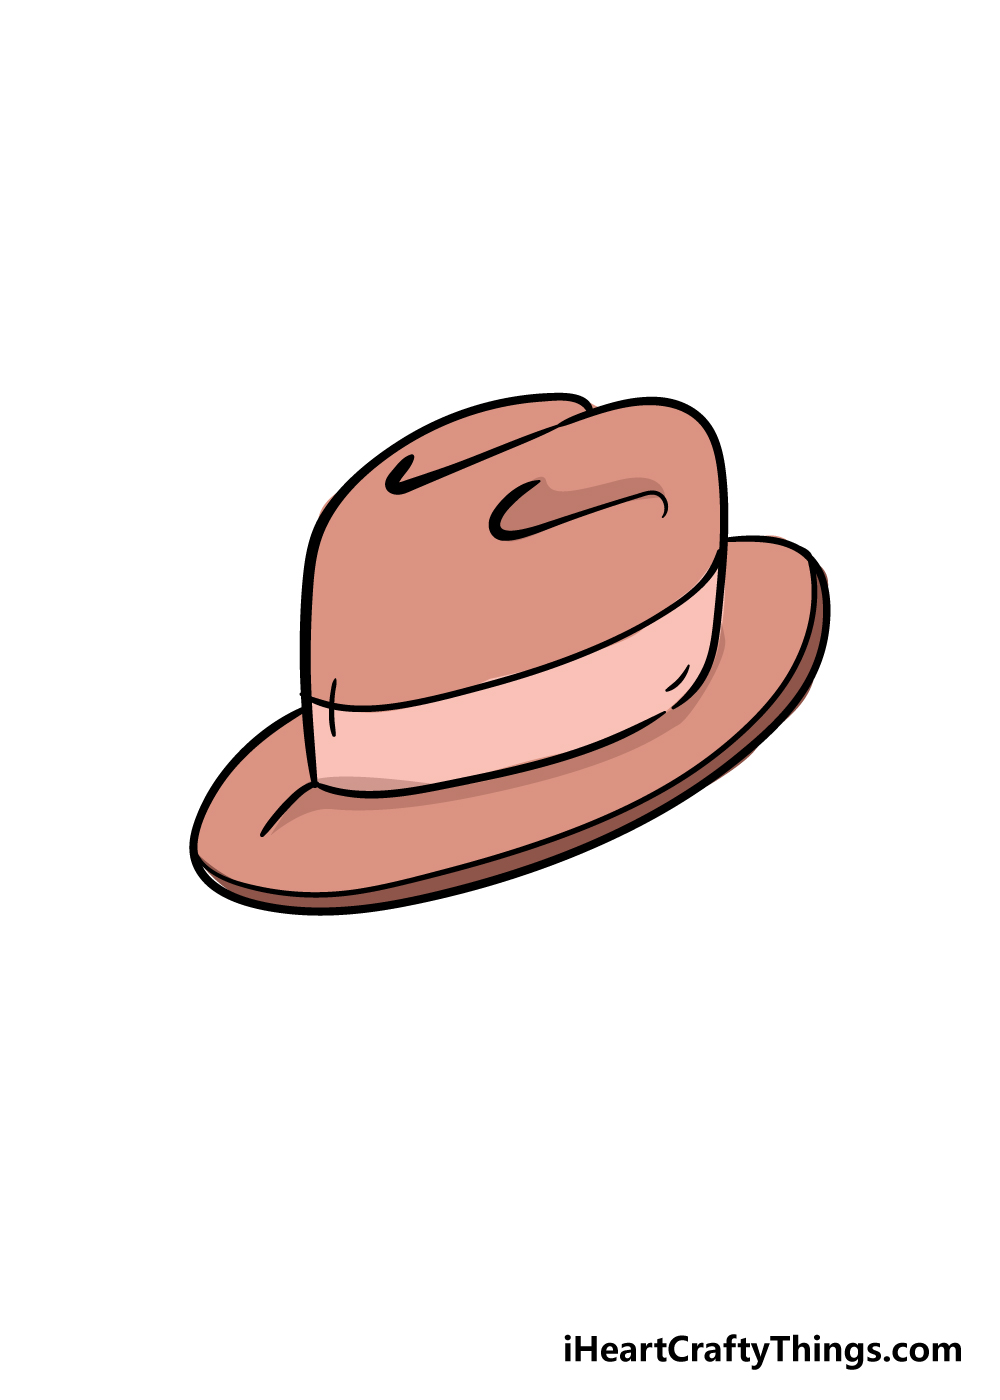 hat-drawing-how-to-draw-a-hat-step-by-step